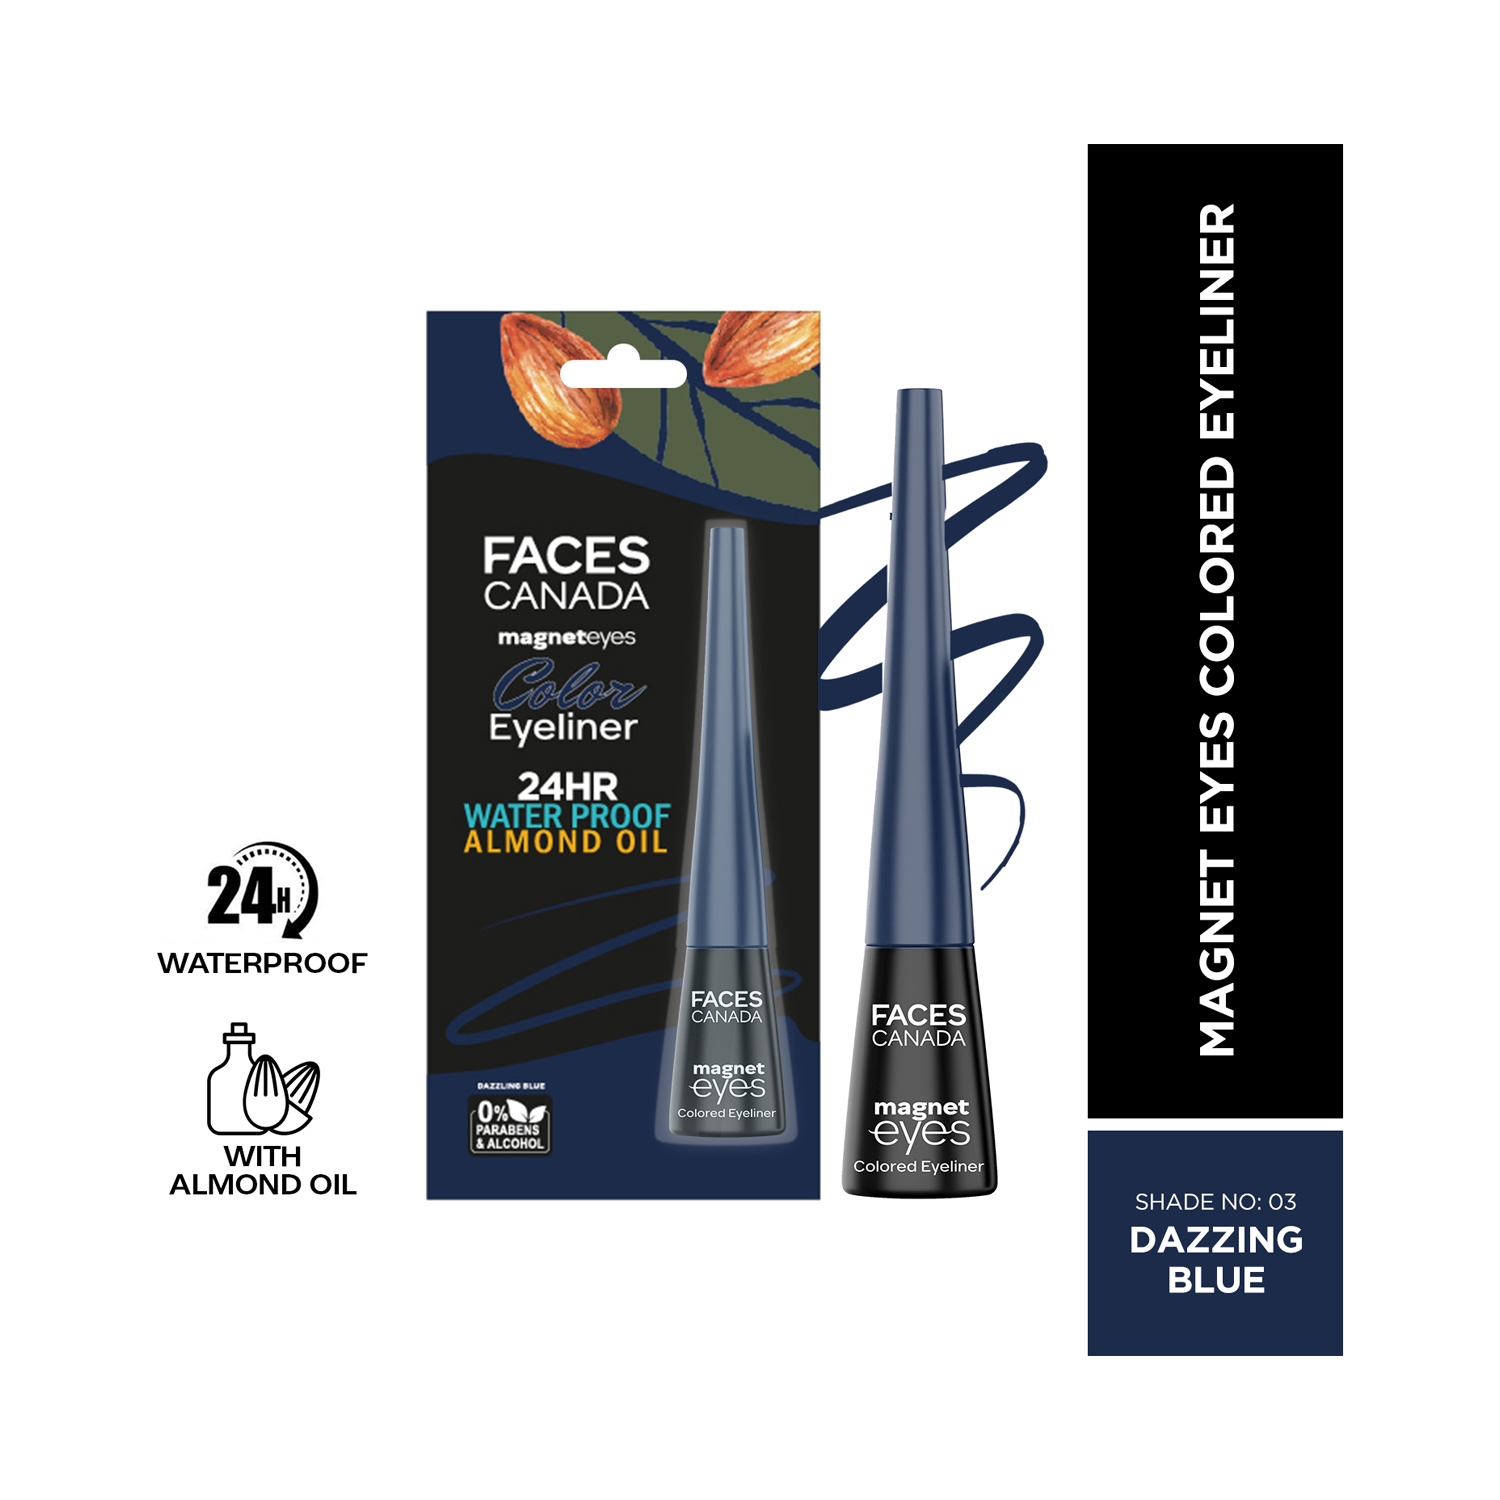 Faces Canada | Faces Canada Magneteyes Colored Eyeliner - 03 Dazzling Blue (4ml)